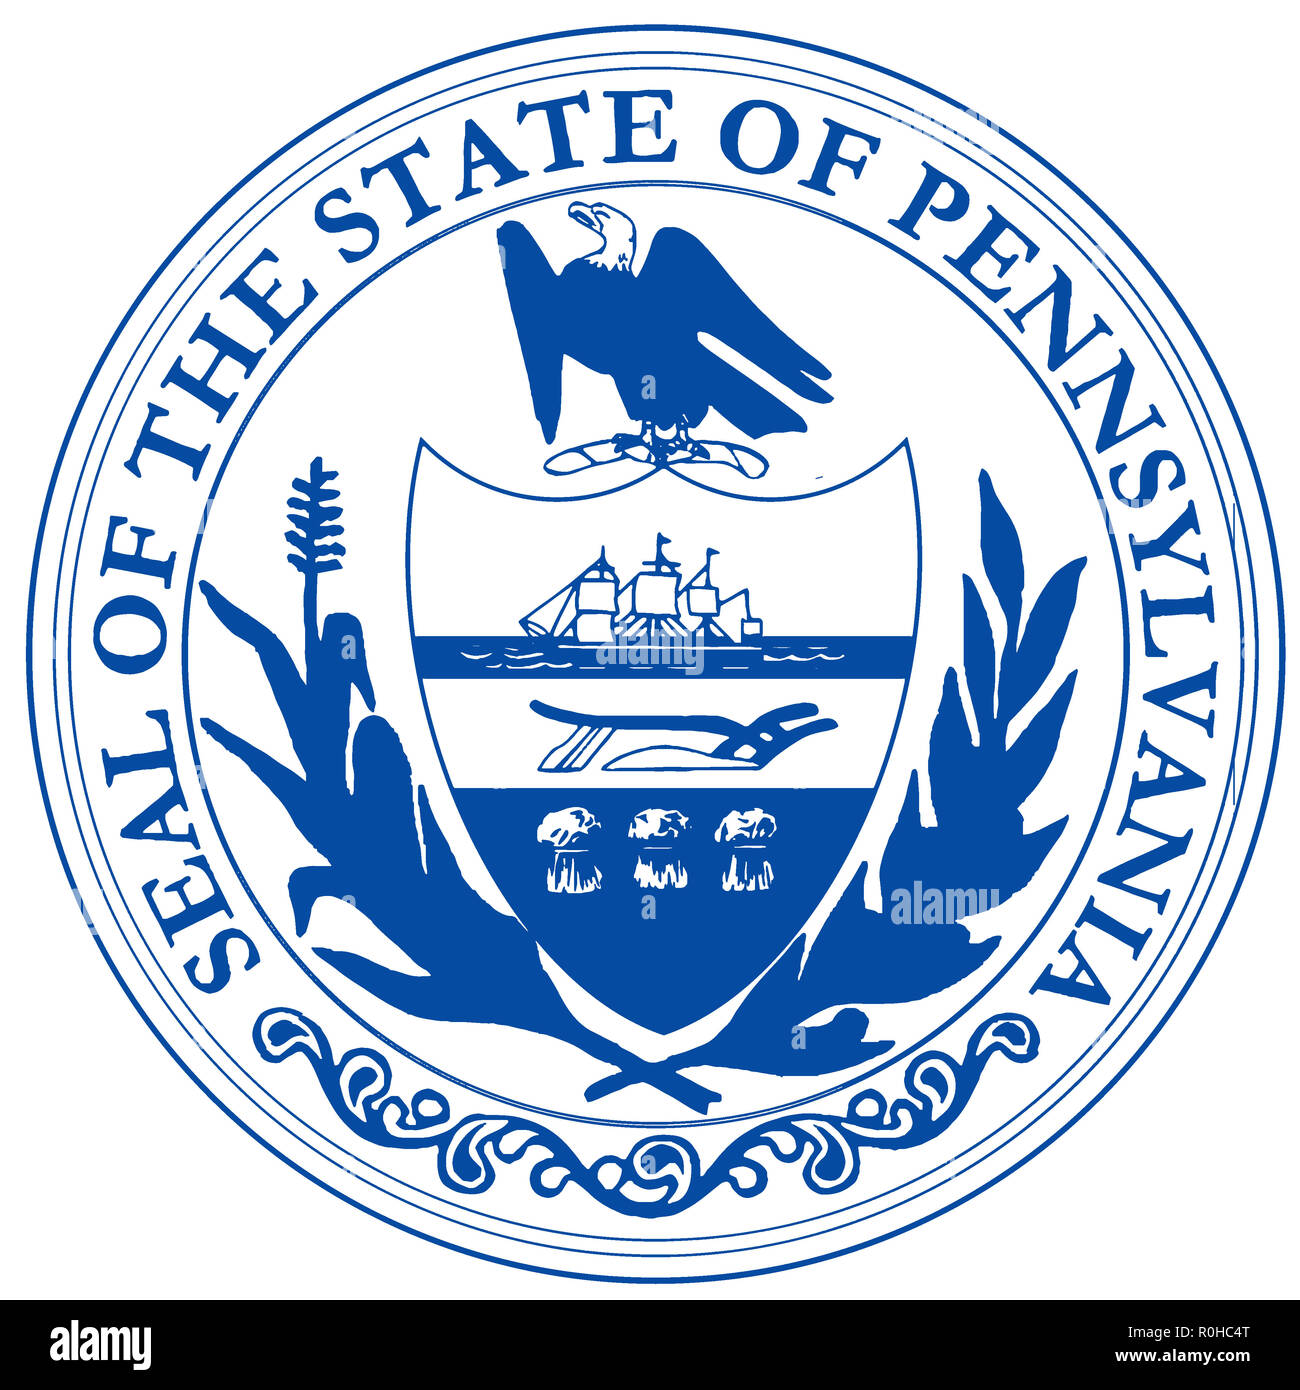 The great seal of the USA state of Pennsylvania over a white background Stock Photo